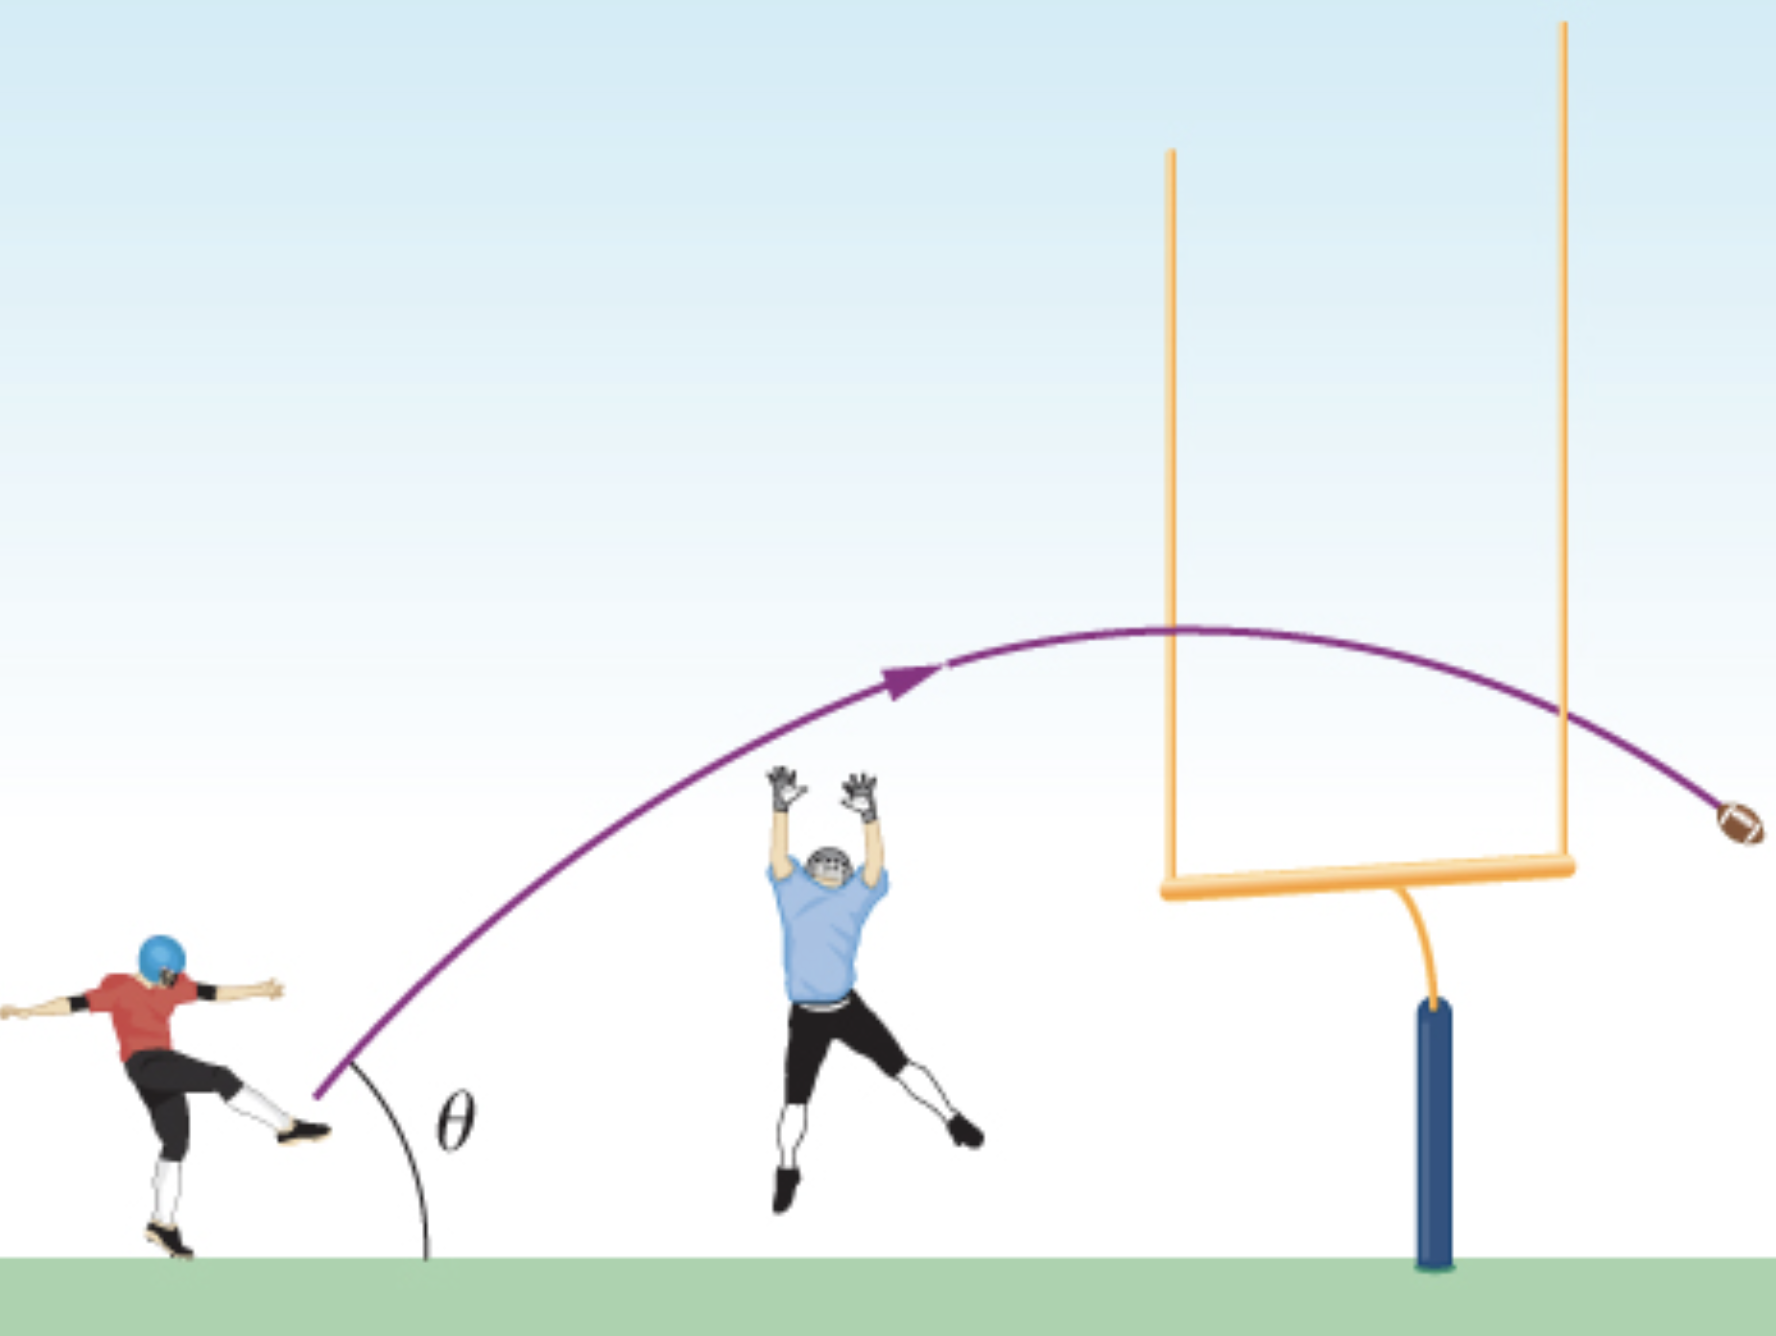 An image showing a field goal kicker kicking a field goal. The trajectory of the football is shown by a purple line that initially makes an angle of theta with the horizontal. A defensive lineman stands between the field goal kicker and the goalpoasts.